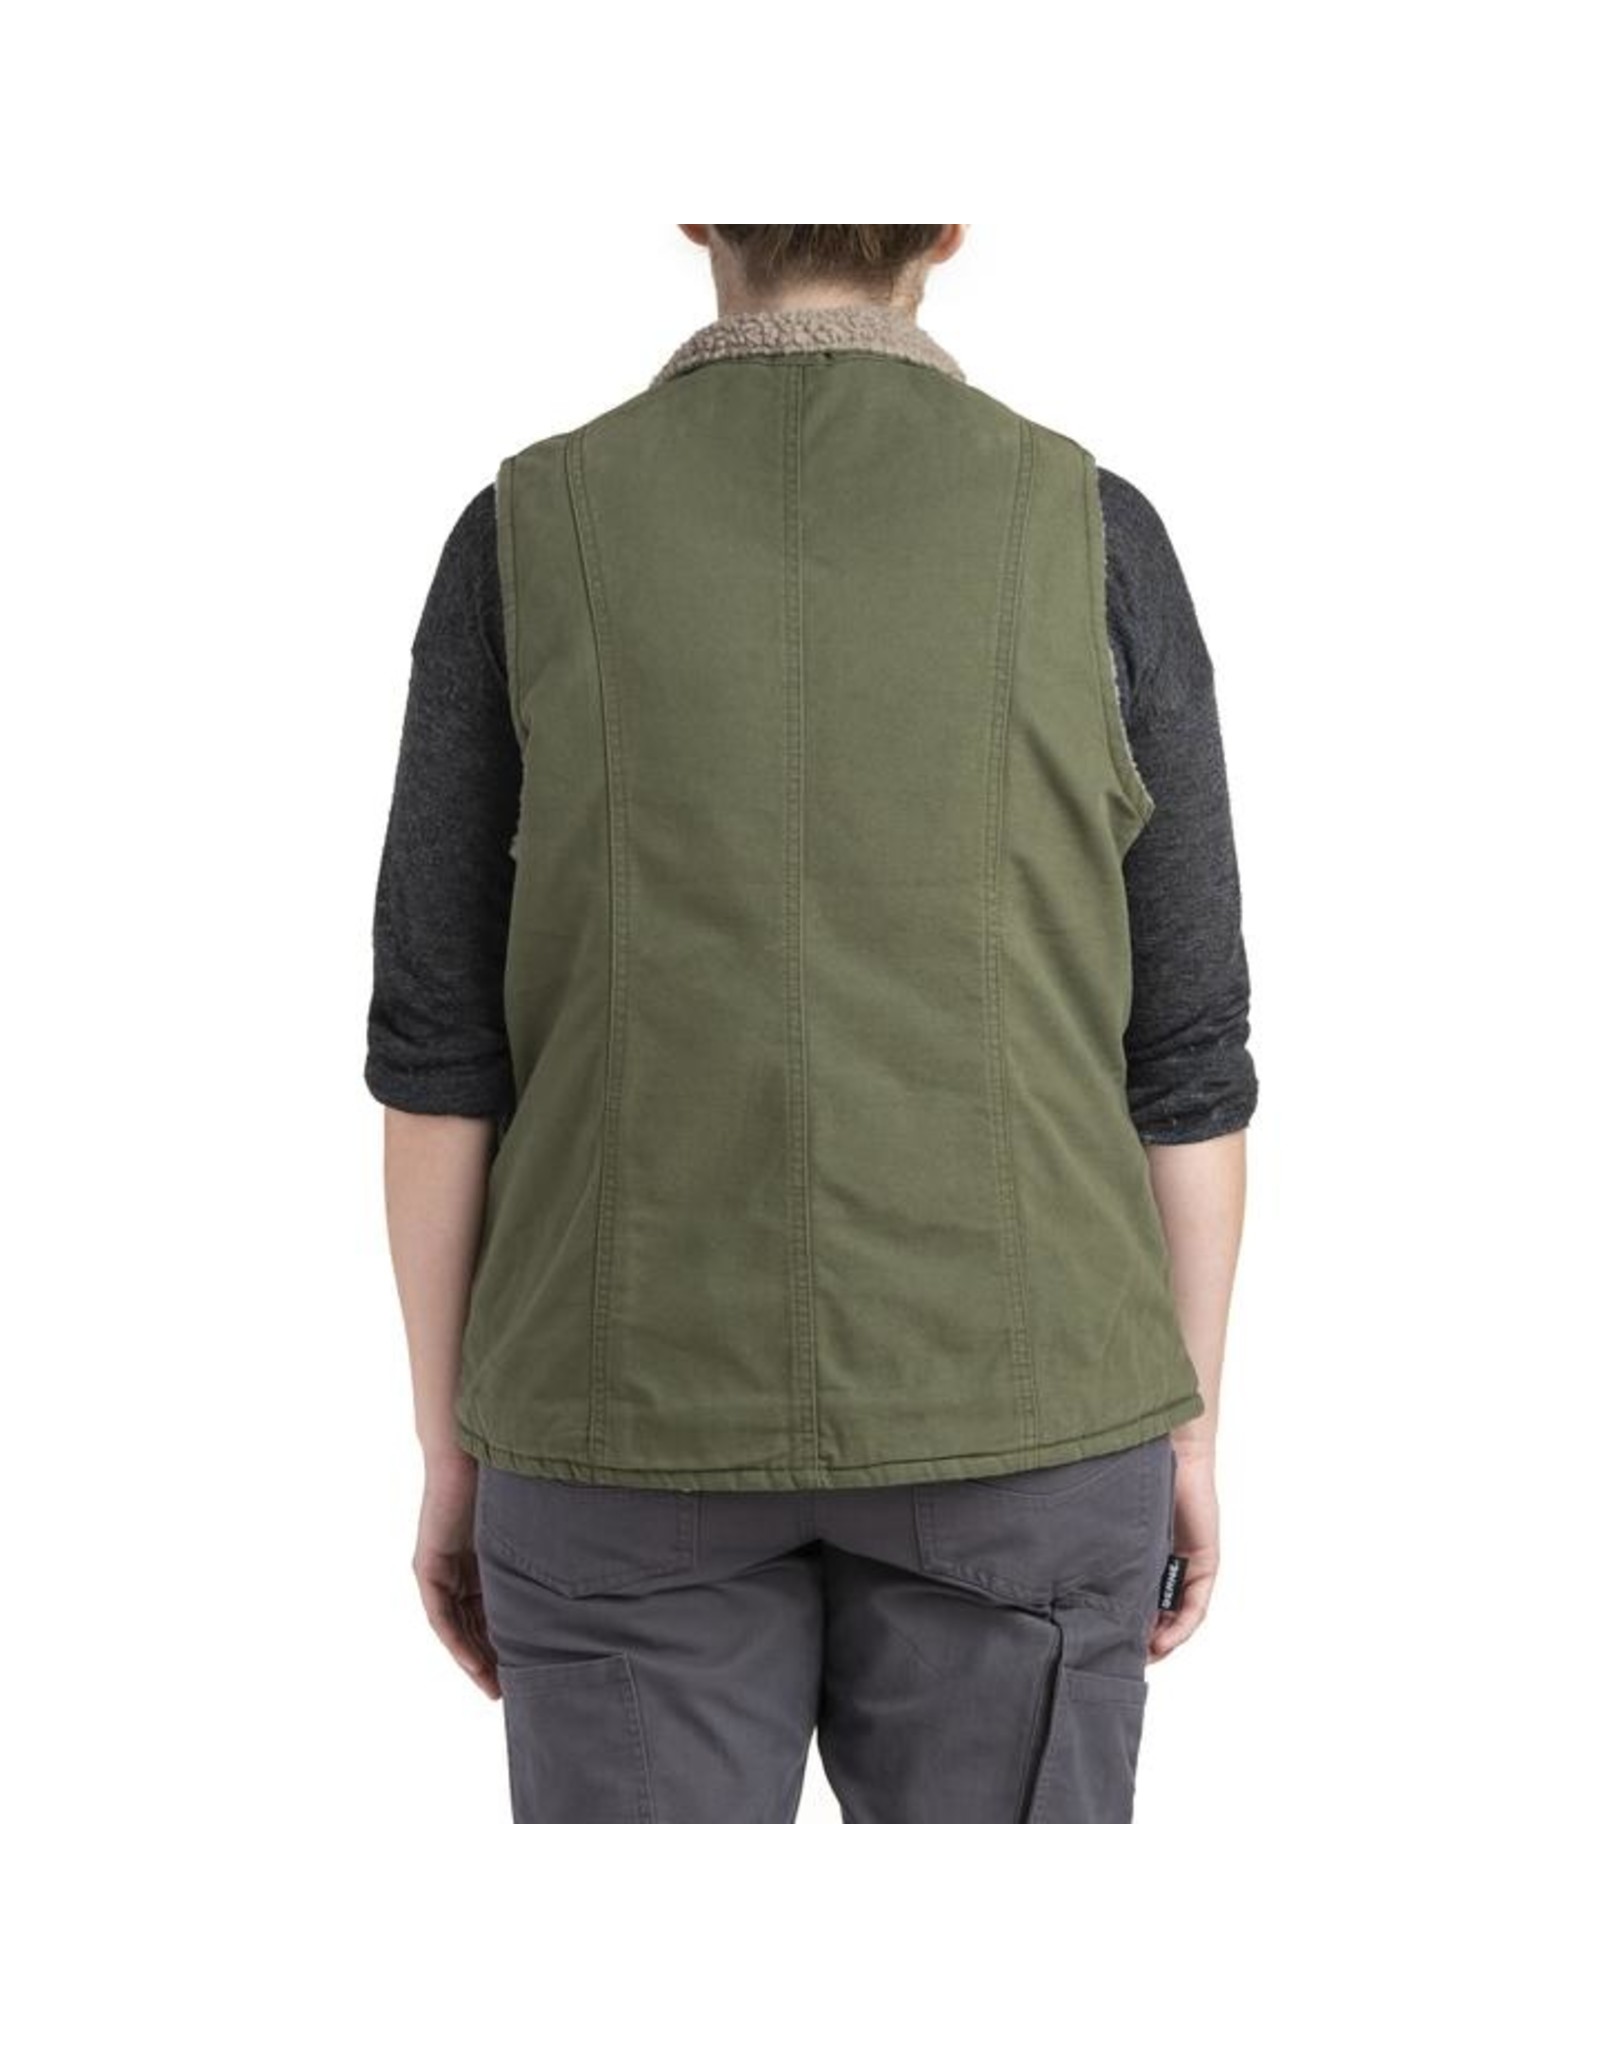 Berne Ladies Canyon Sherpa-Lined WV15 Vest